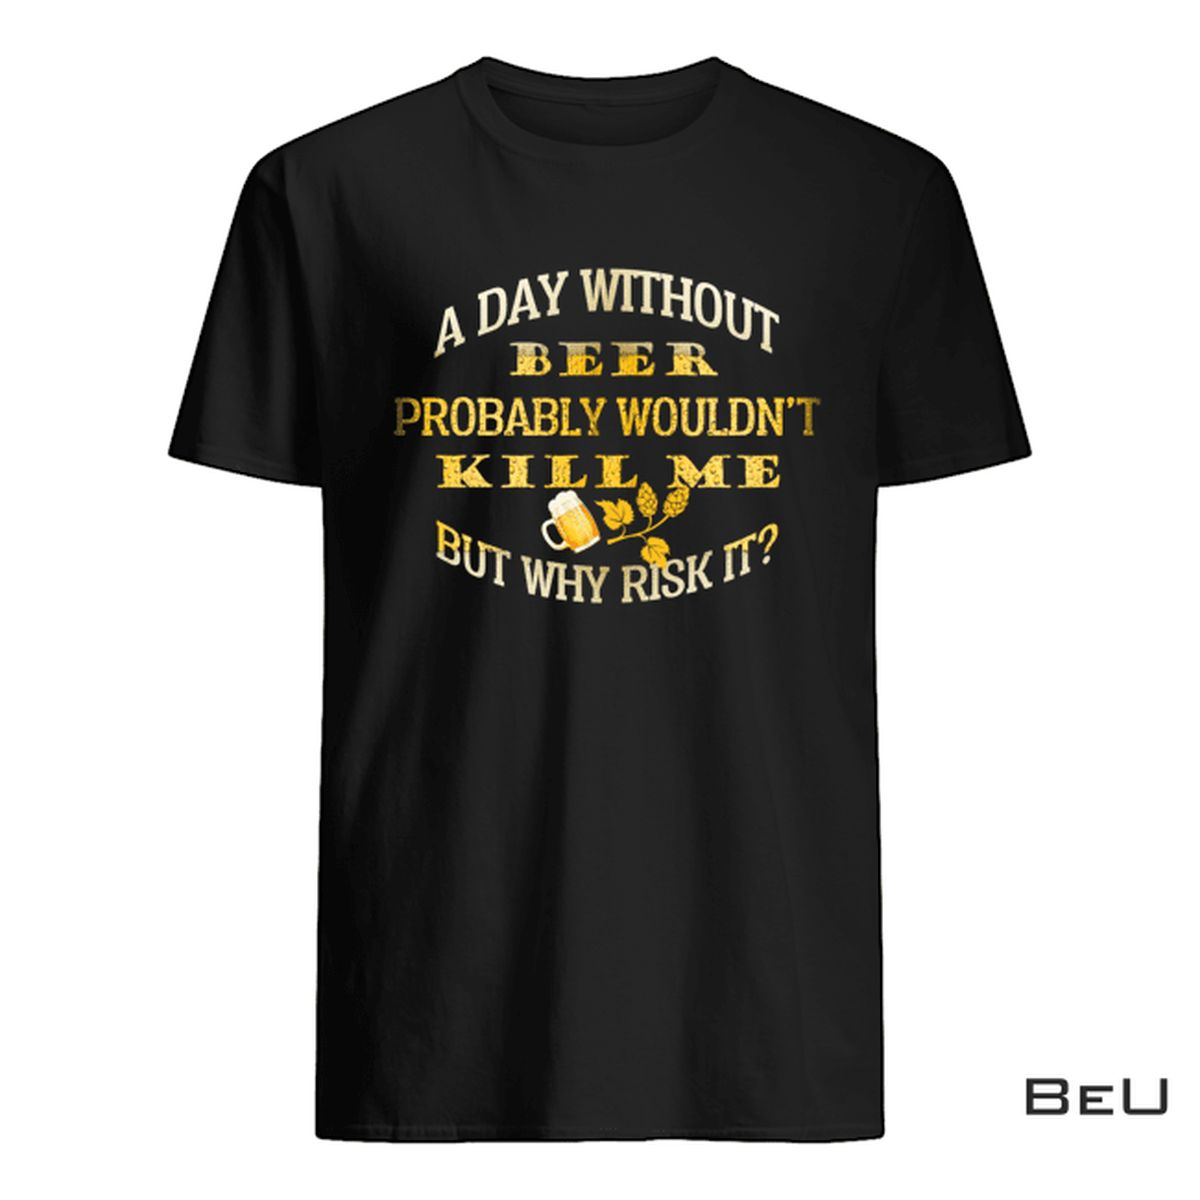 A Day Without Beer Probably Wouldn't Kill Me But Why Risk It Shirt